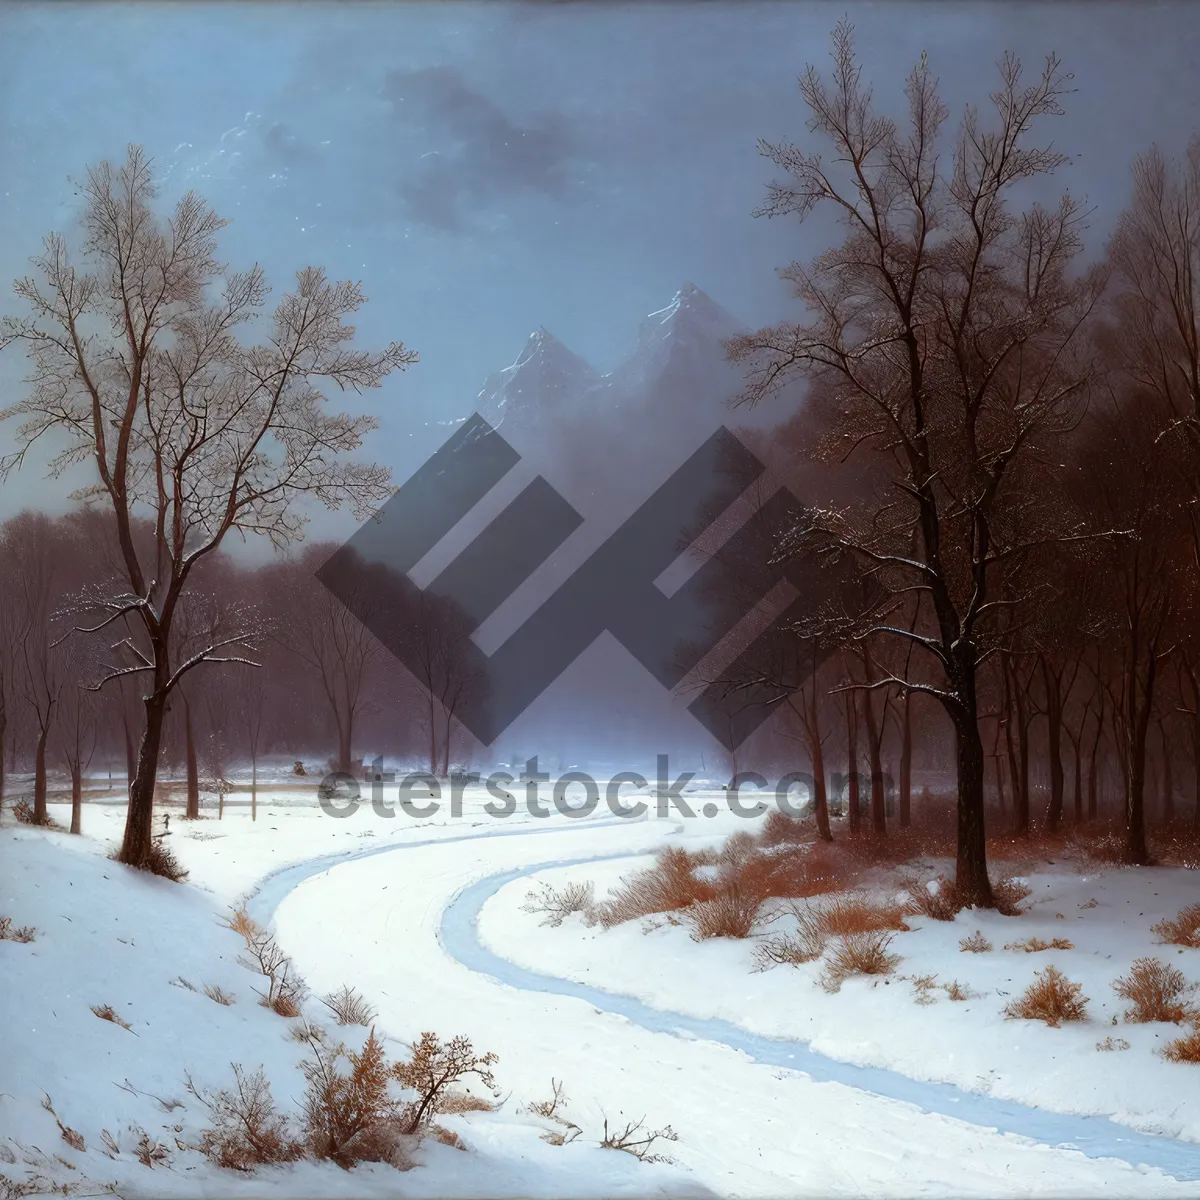 Picture of Winter Wonderland: Snowy Forest Landscape with Frozen Trees